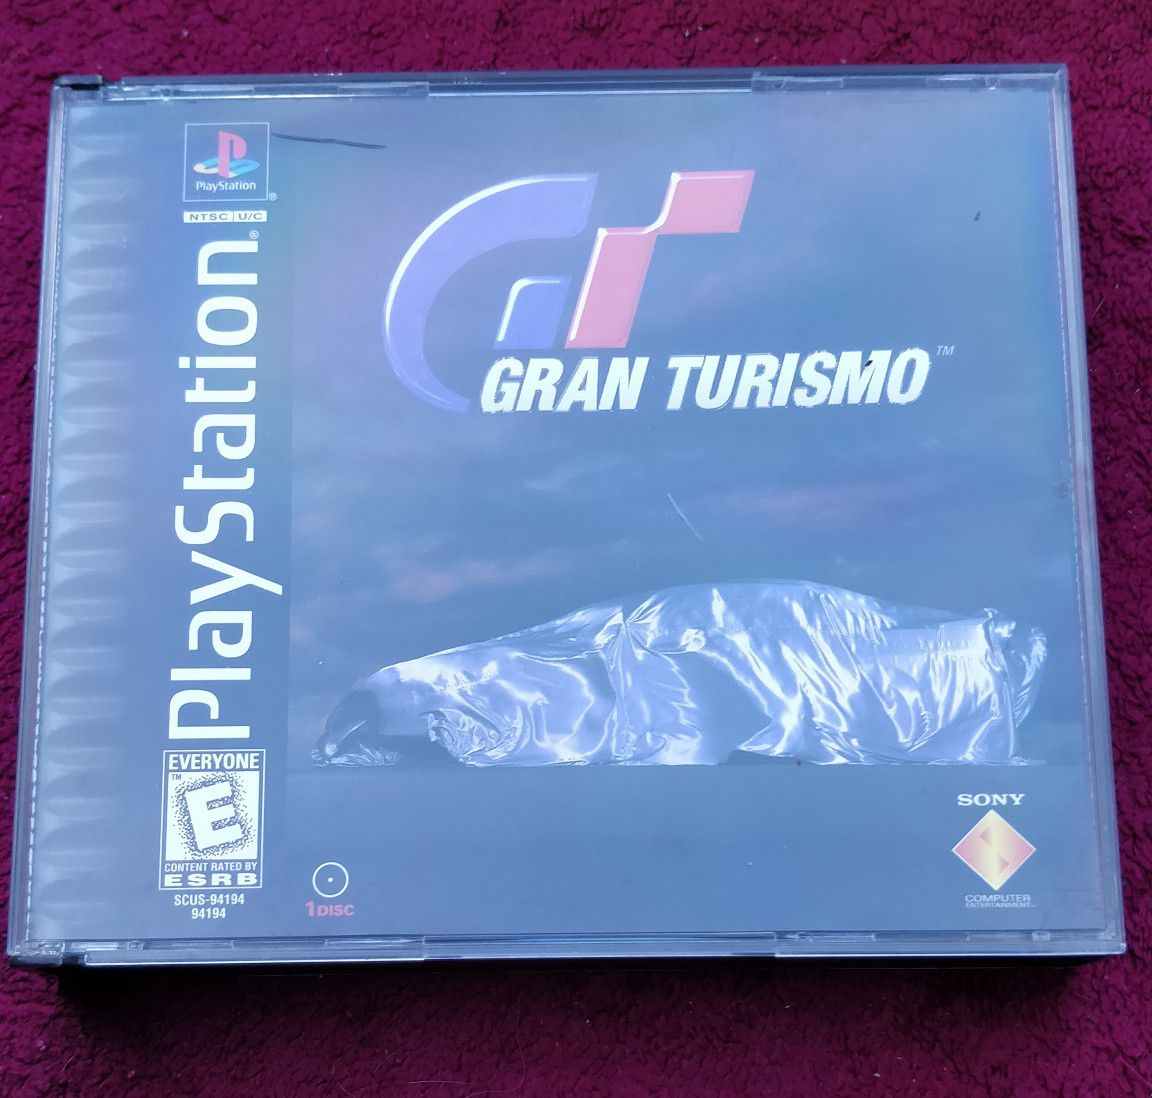 Gran Turismo game for PlayStation